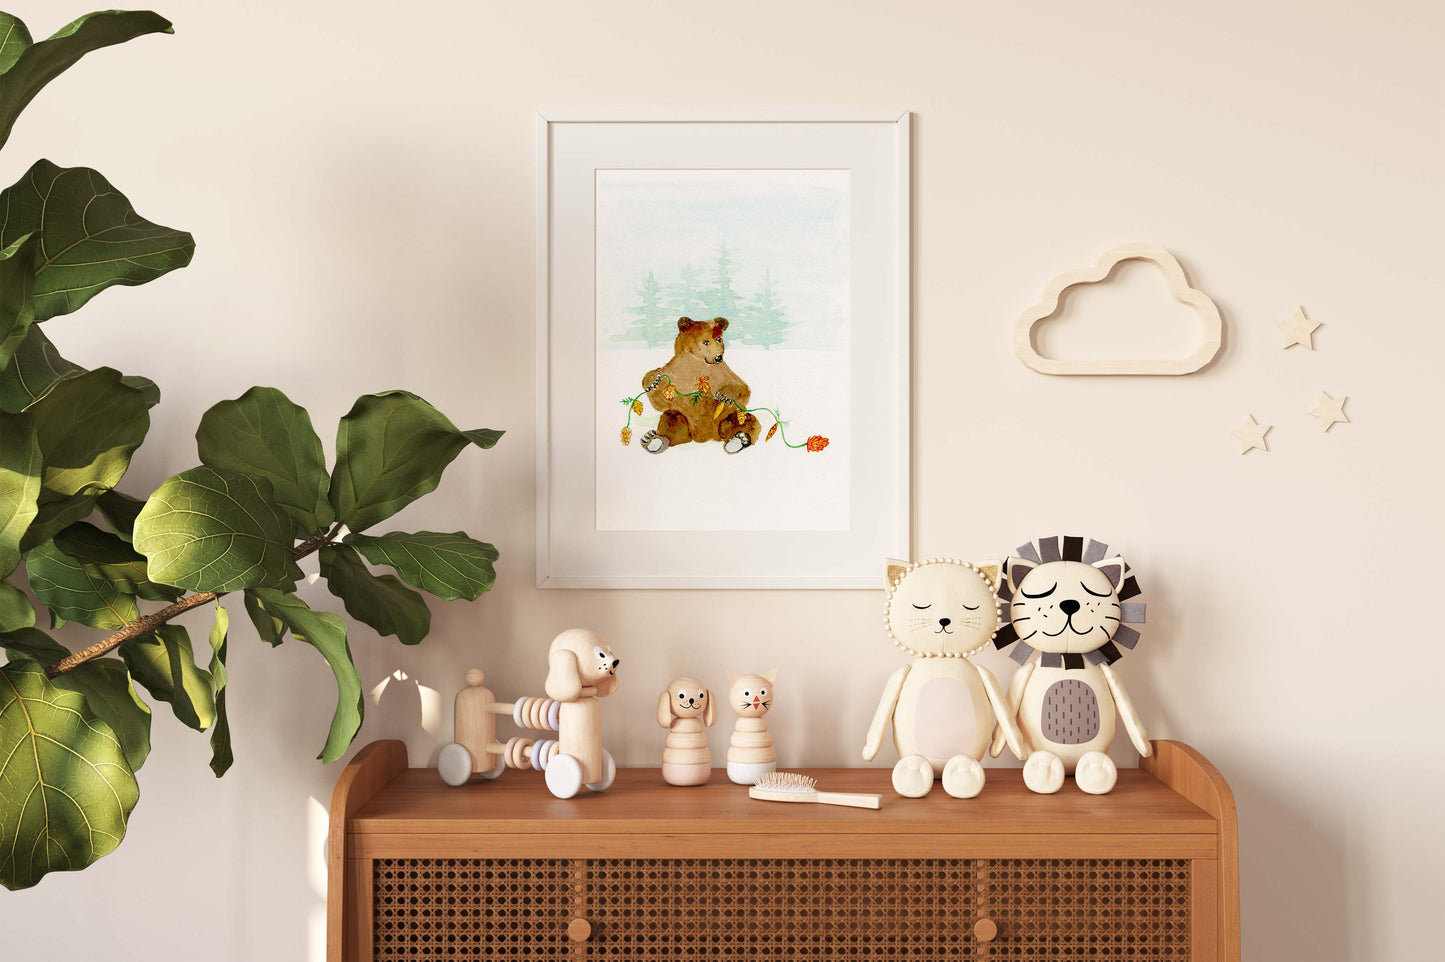 Wall Art Print of Cute Bear with Pinecones - Flamingo Shores - Original Art for Home Decor and Gifts